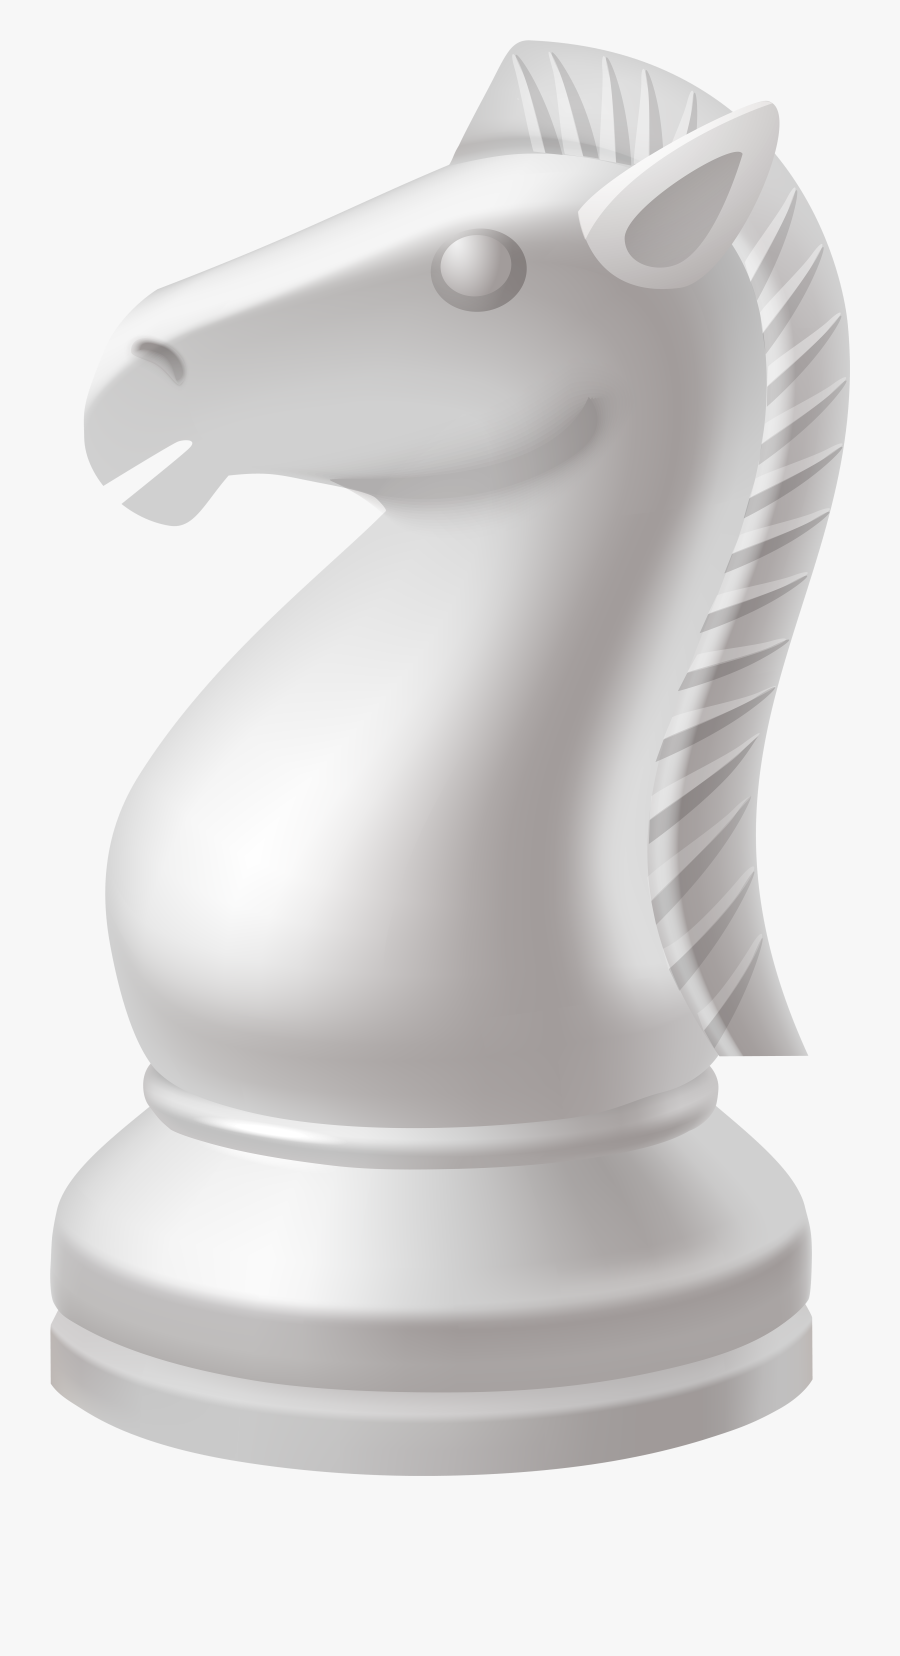 Knight Chess Piece Png - White Knight Chess Piece Png , Free